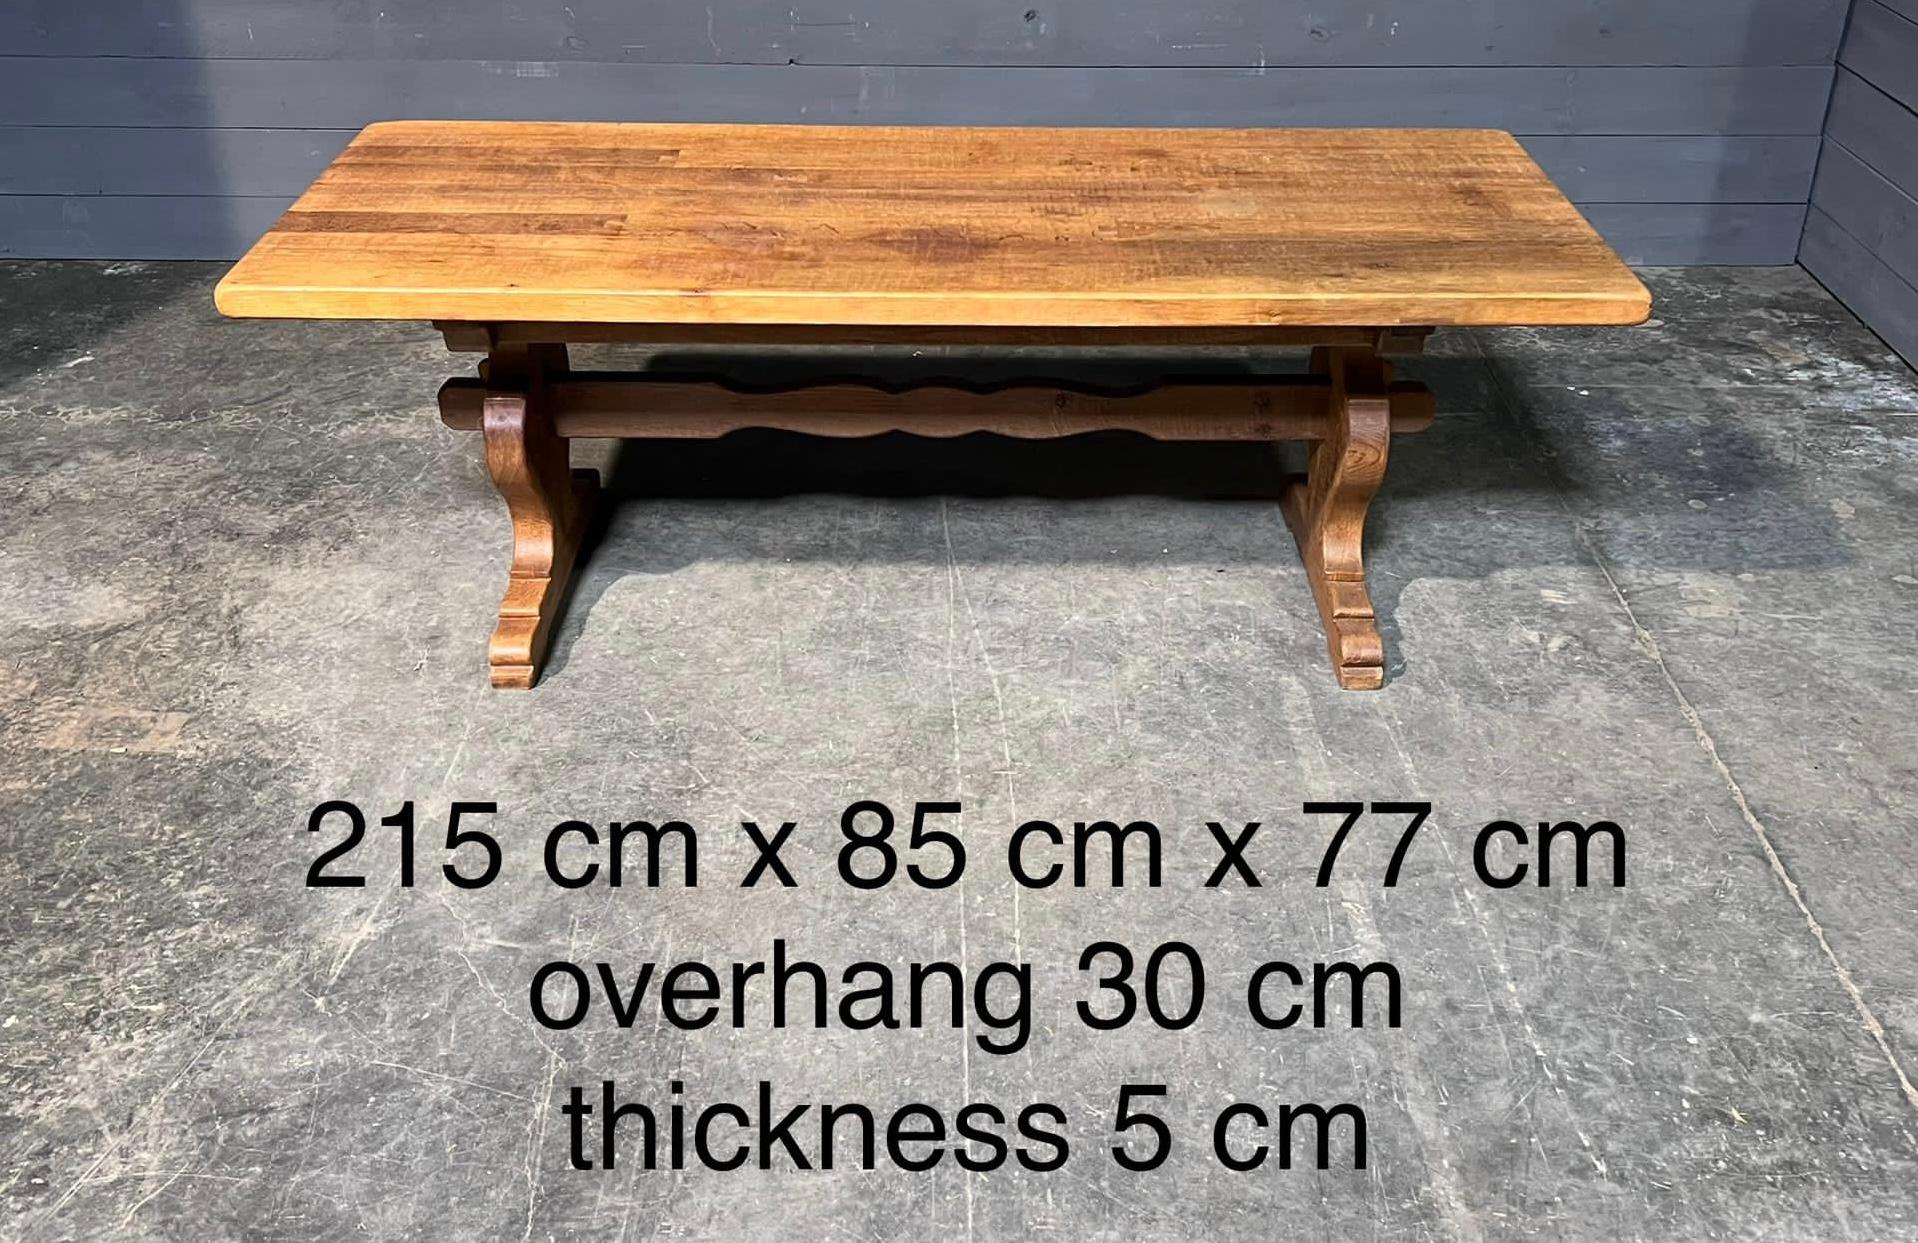 A lighter original colour French solid oak farmhouse refectory dining table. Dating to the early 1900s and of excellent quality construction. The table comes apart for easy access into the home. Having its original light Oak colour and a nice patina